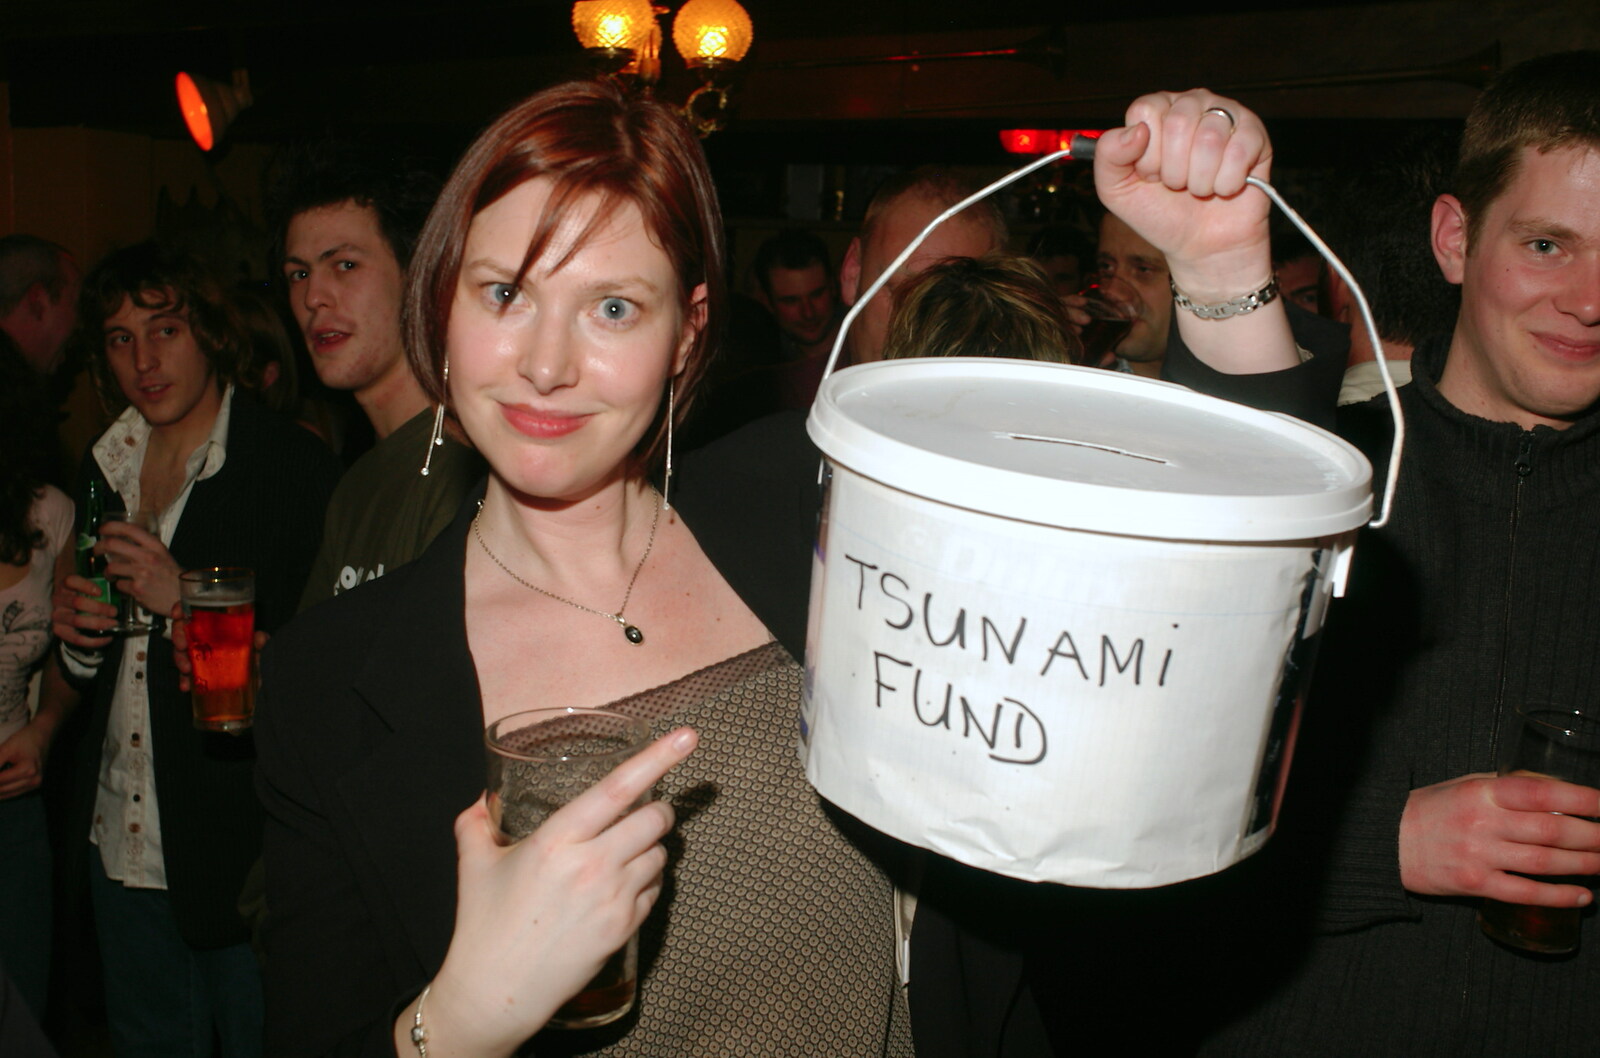 Proof that it's for the Tsunami fund from Tsunami-Aid at the Greyhound, Botesdale, Suffolk - 5th February 2005